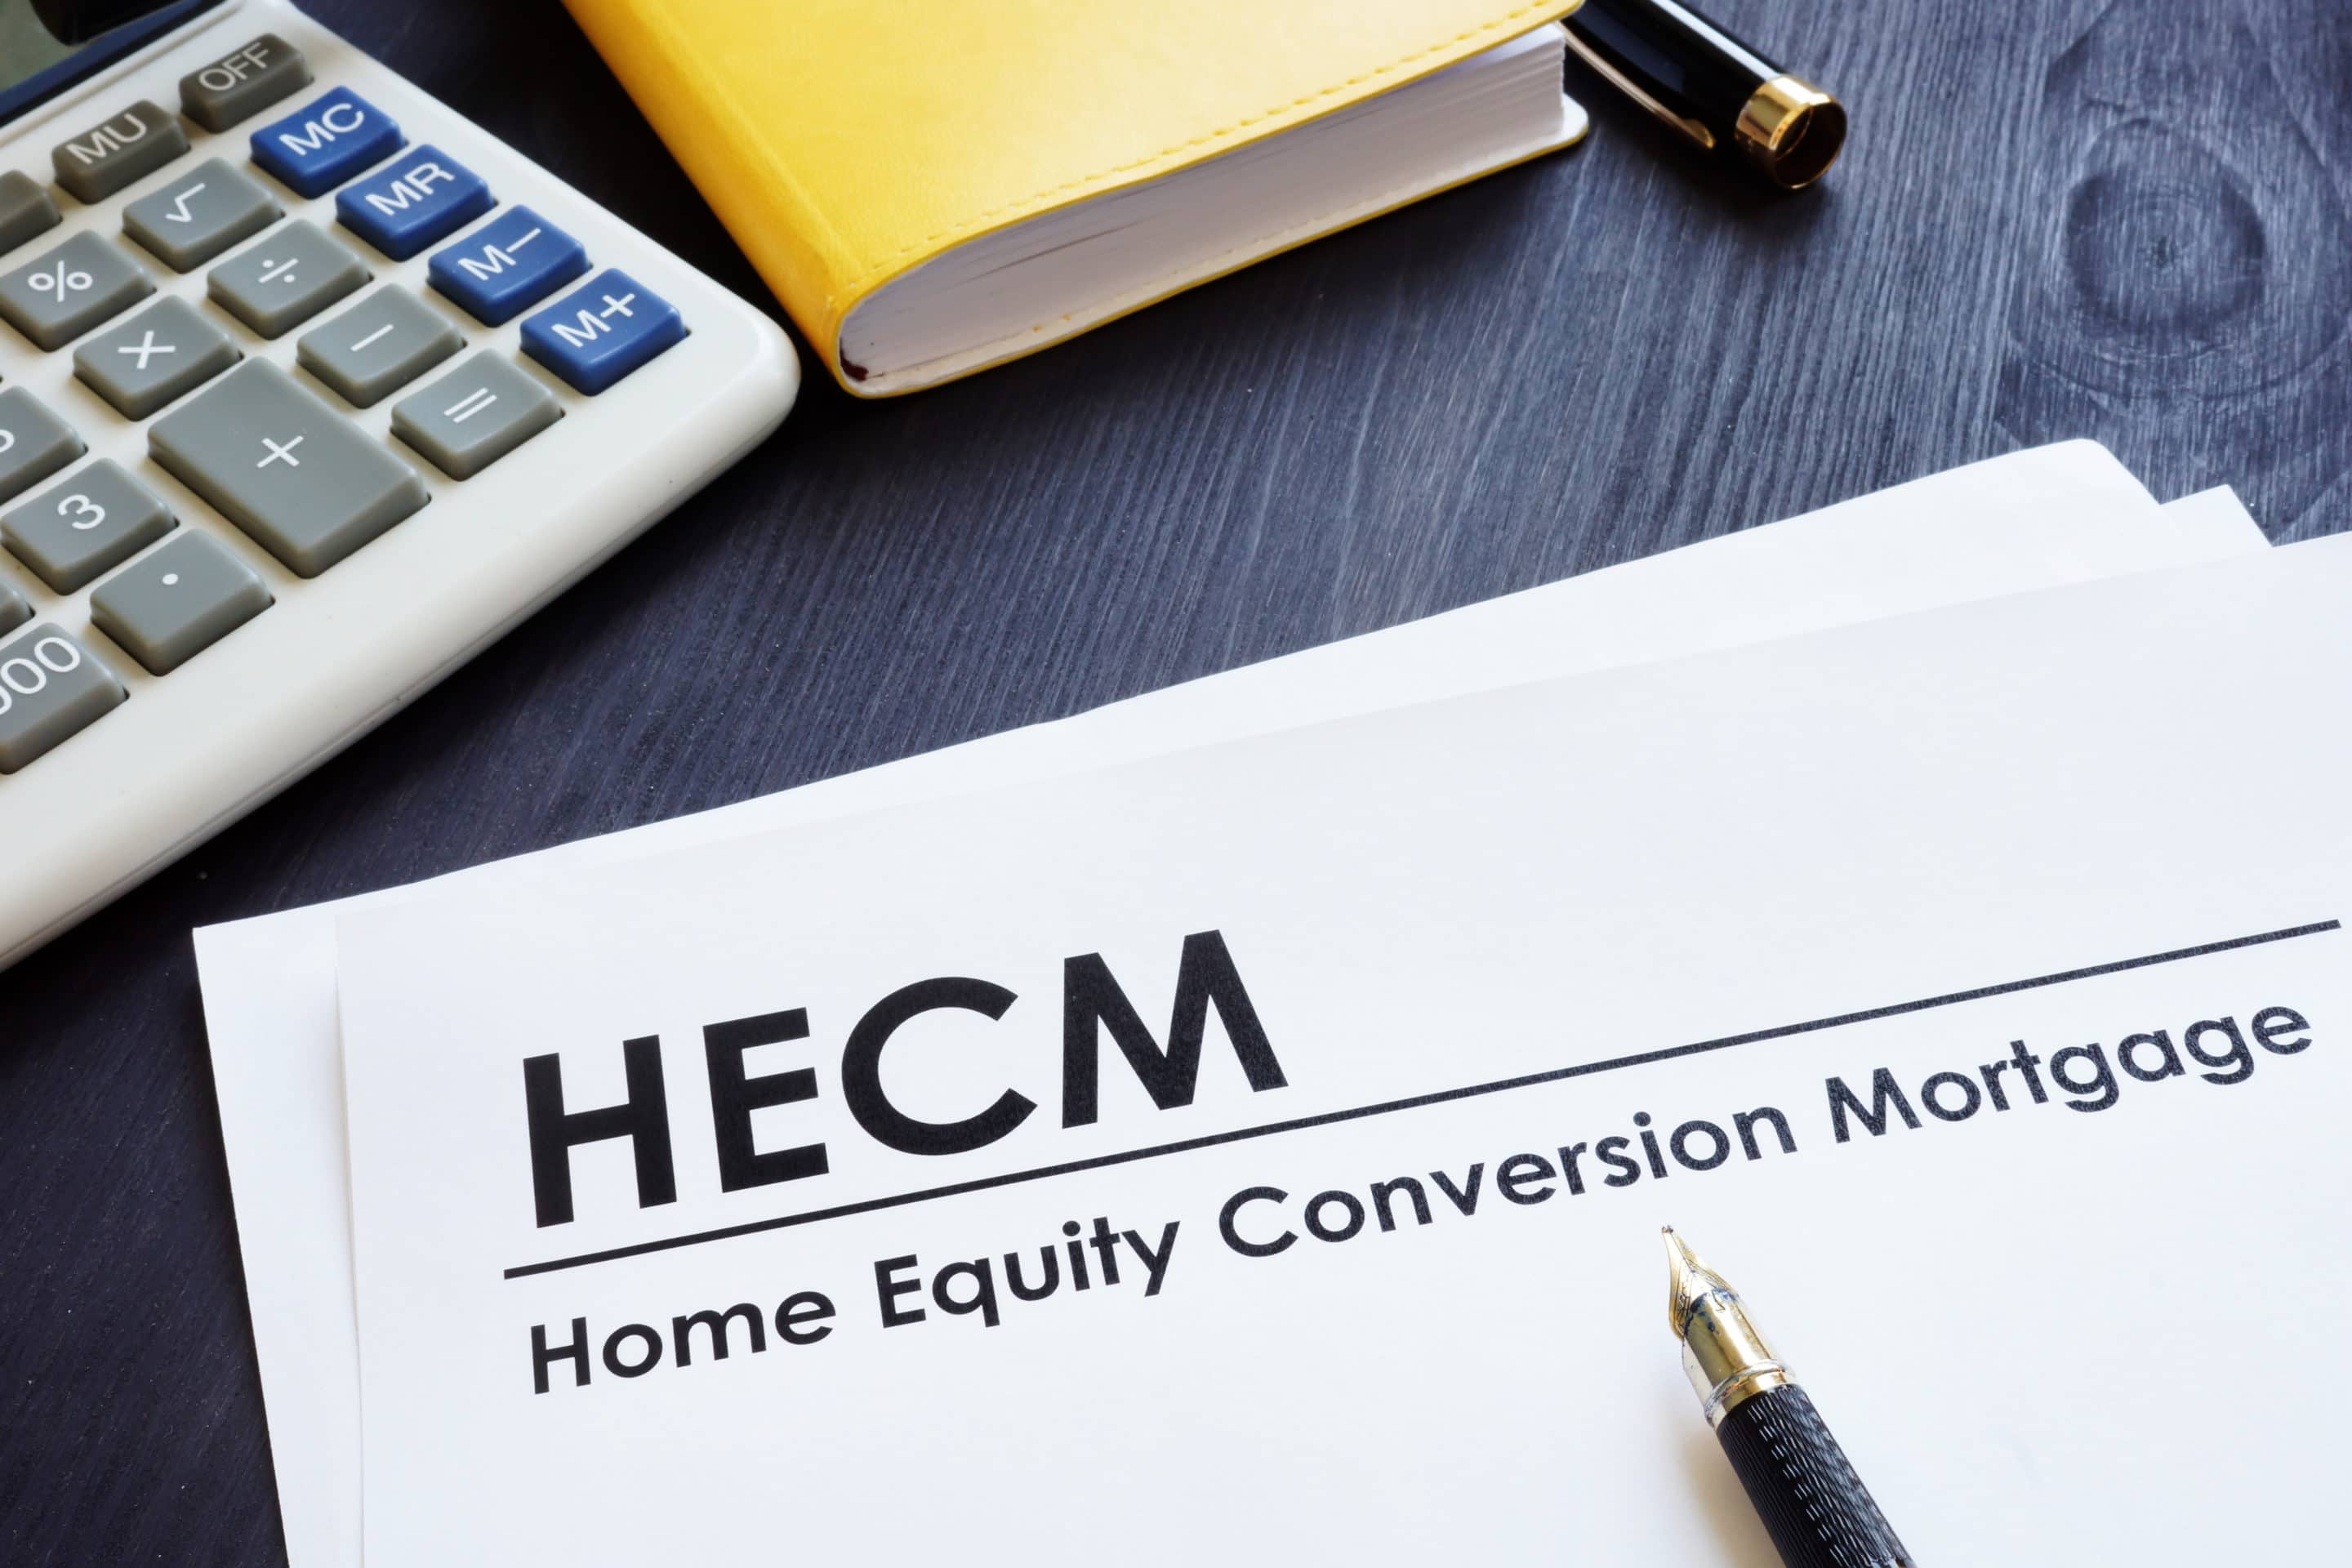 a piece of paper that says "HECM Home Equity Conversion Mortgage"